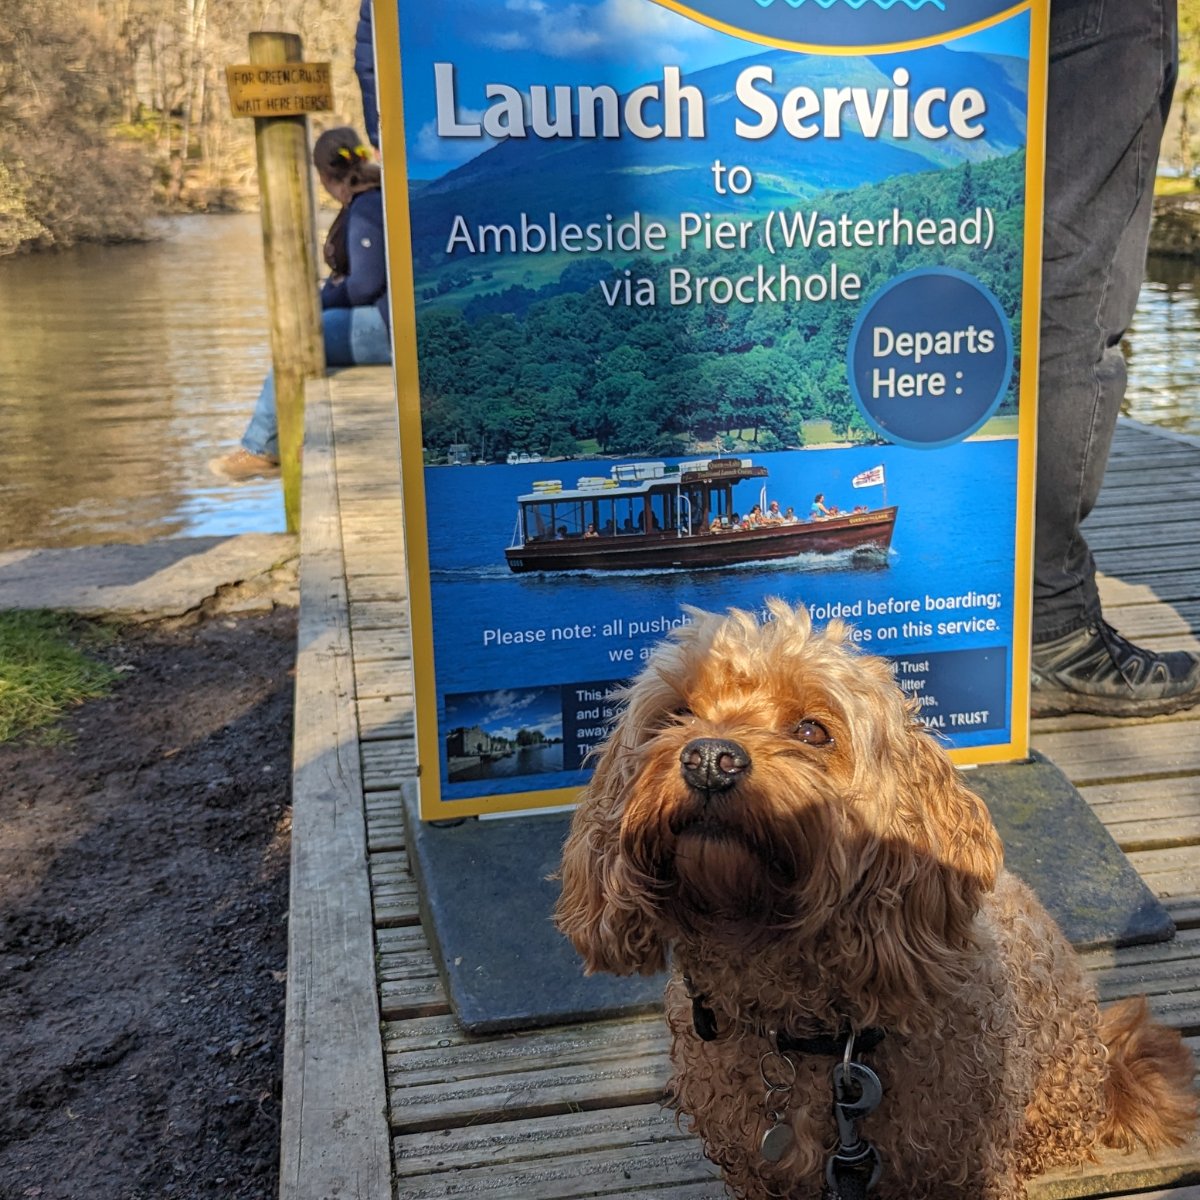 Paws up if you're ready for a boat ride with Windermere Lake Cruises! 🐾⛵️ #WindermereLakeCruises #BoatRide #DogFriendly